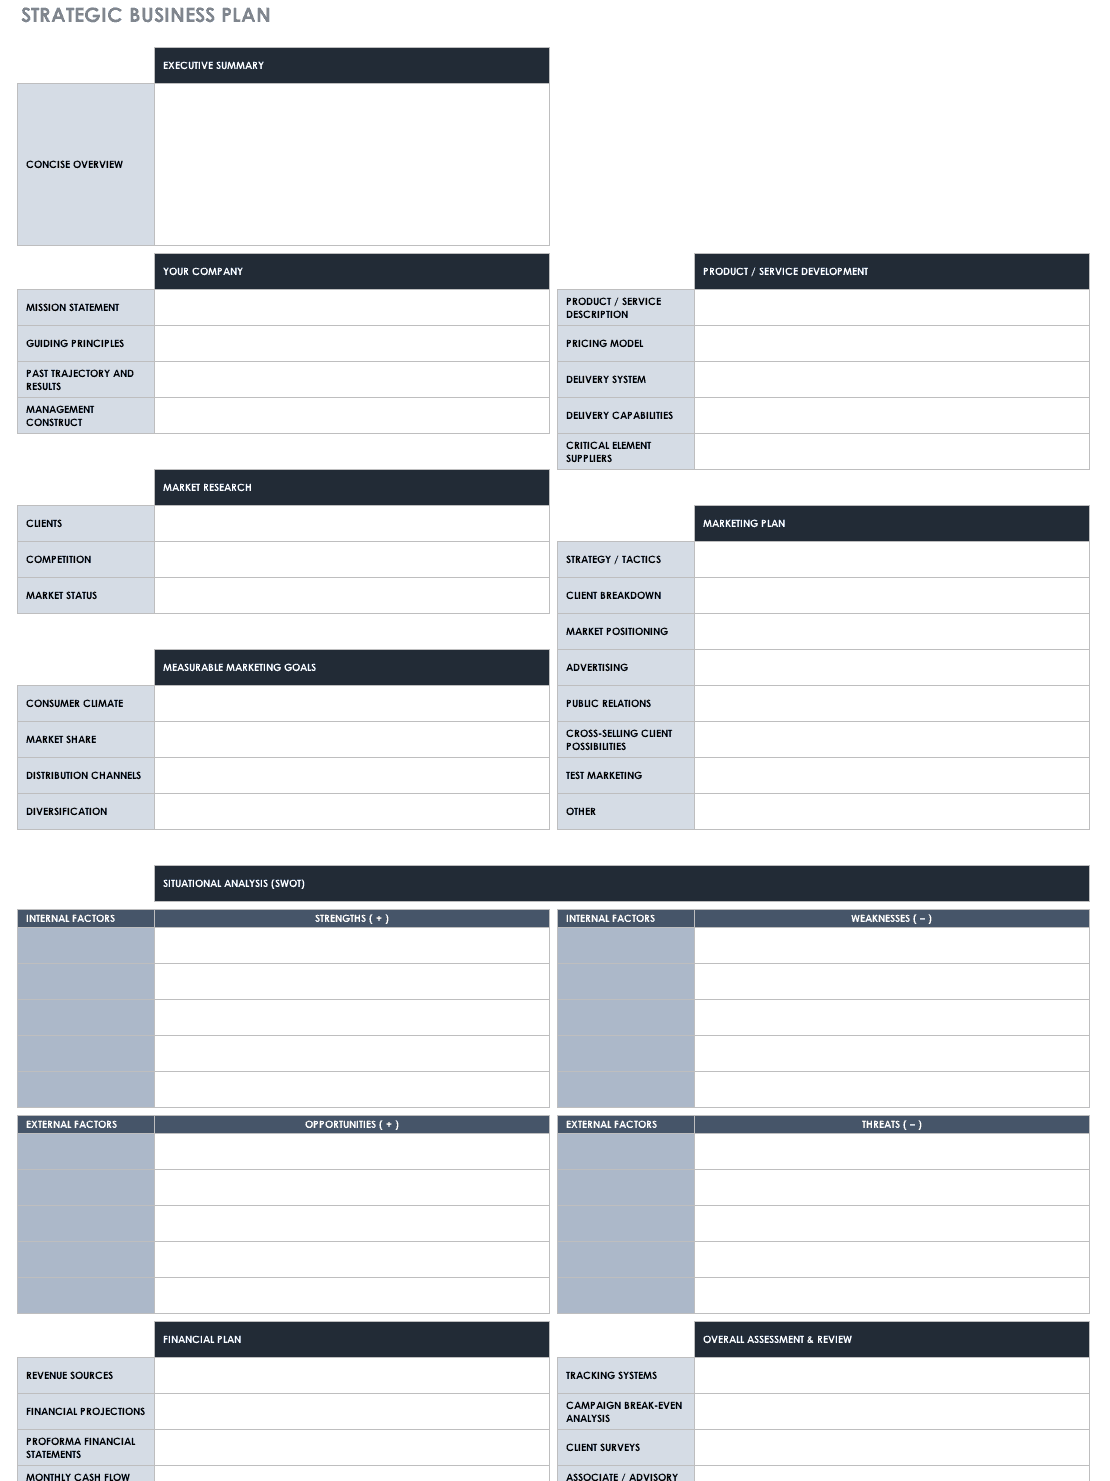 Free Strategic Planning Templates  Smartsheet With Strategic Business Review Template